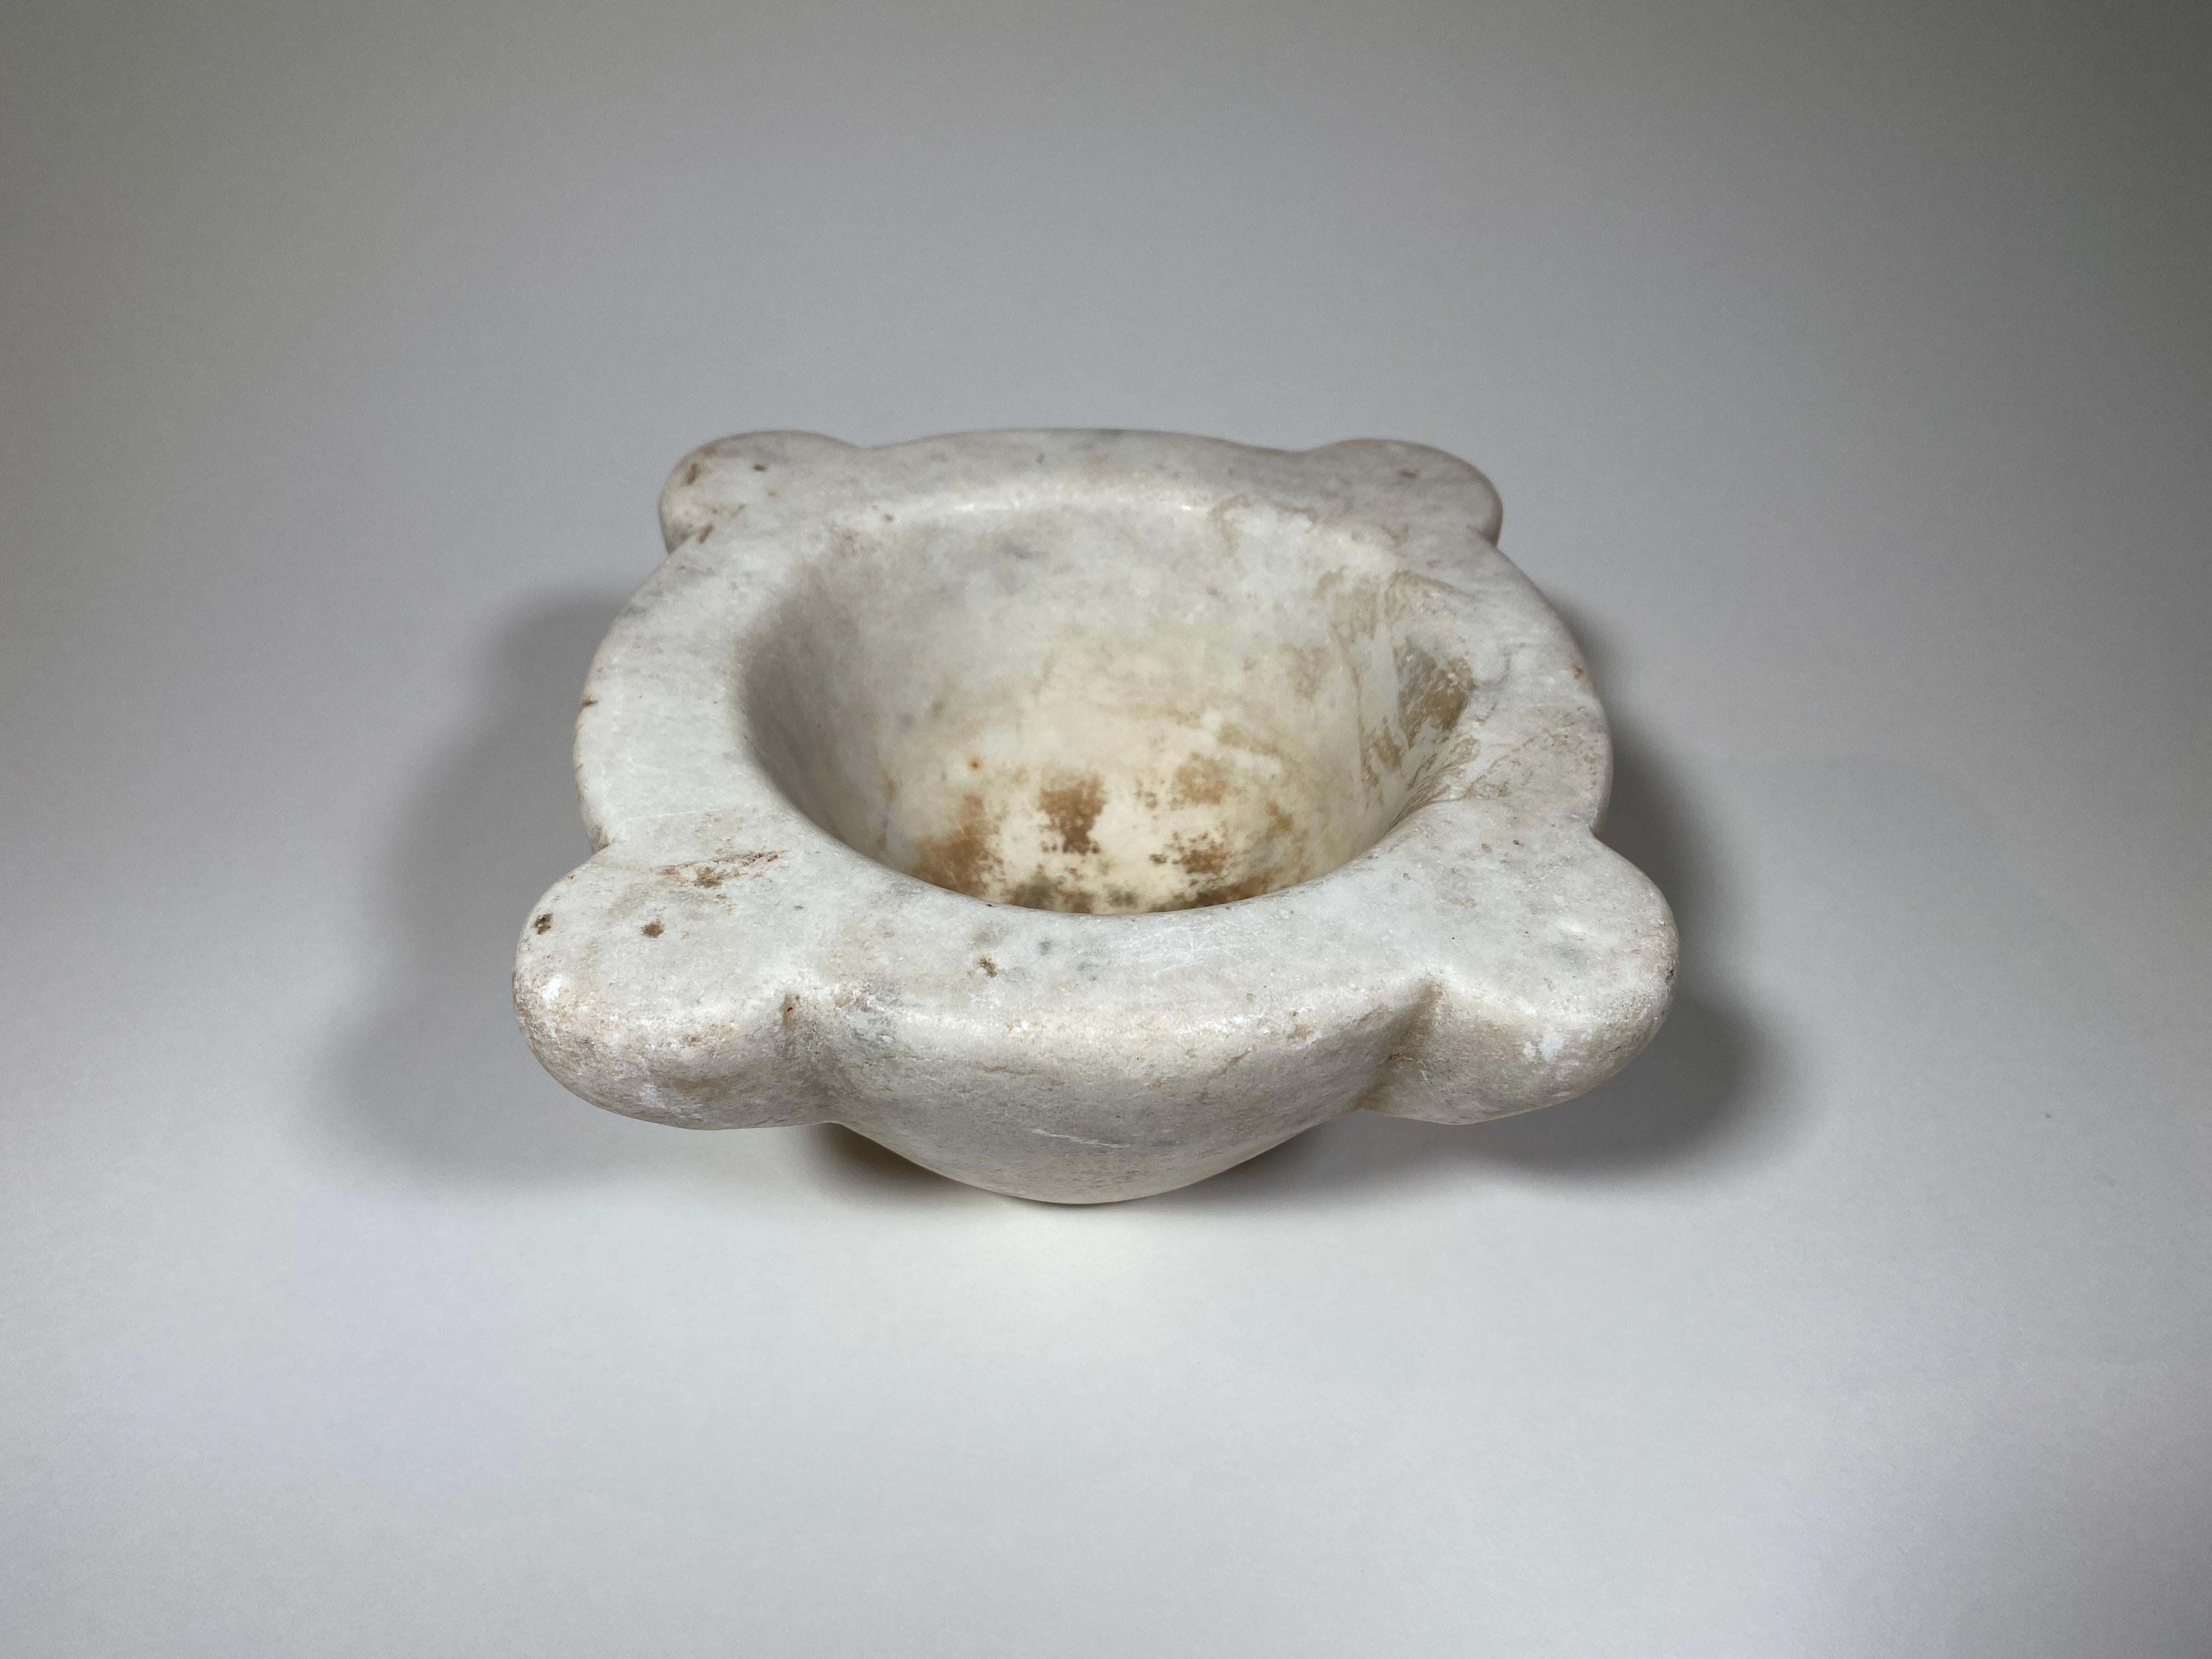 A very charming 18th century mortar from the Catalan region in Spain. Beautifully carved from marble. A wonderful accessory piece for any kitchen, bathroom, or table top.